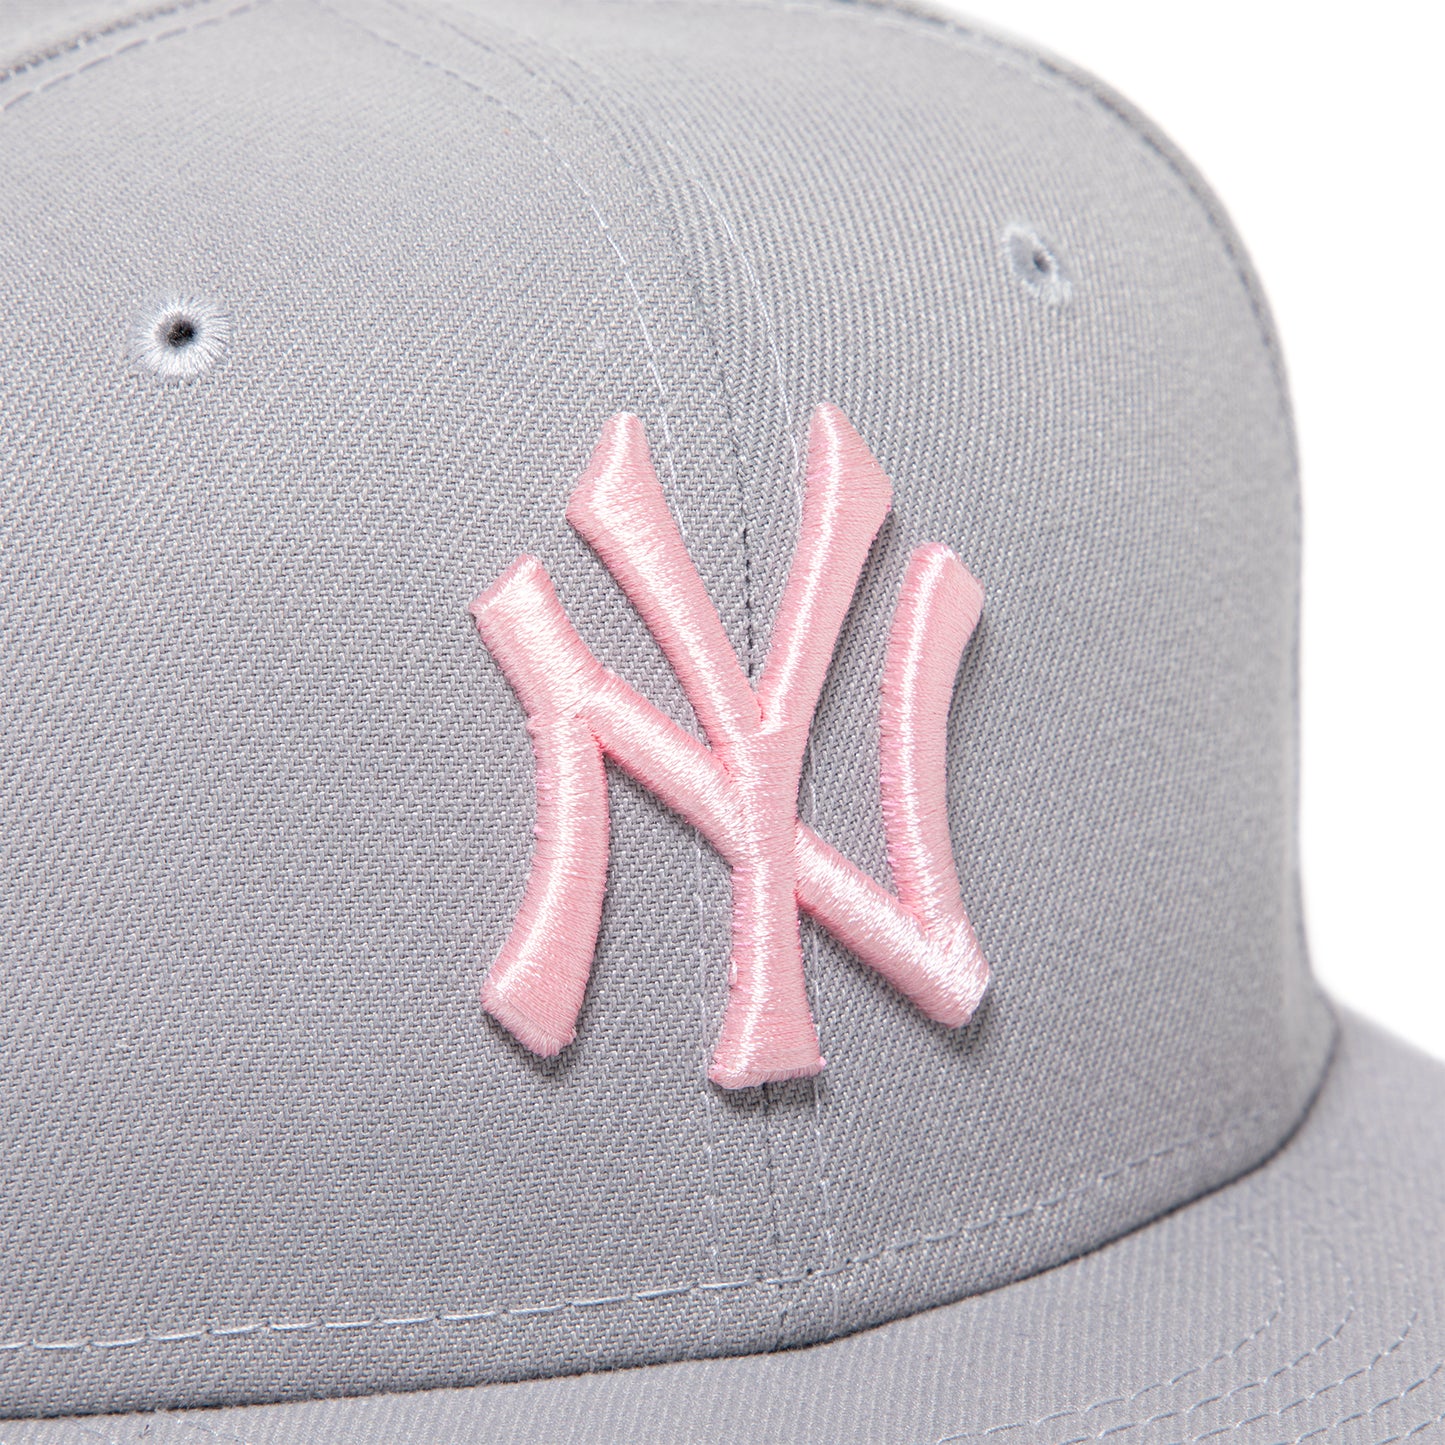 Concepts x New Era 5950 New York Yankees Fitted Hat (Gray/Pink)